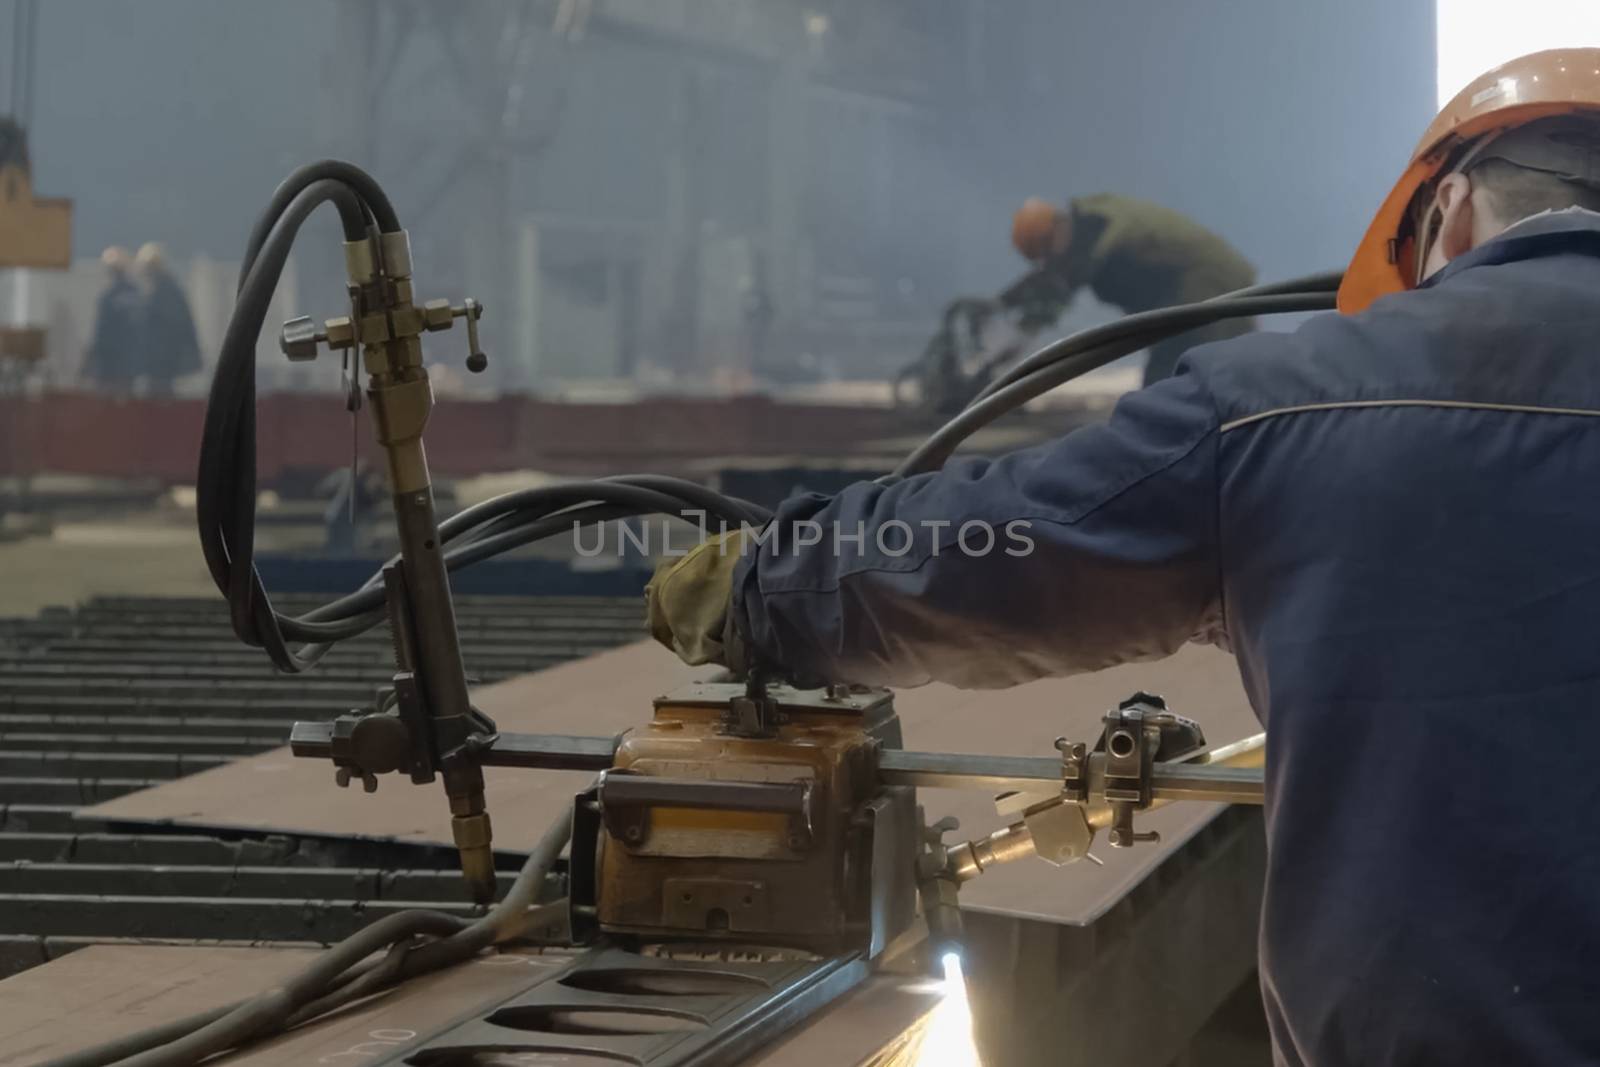 The worker welds the details with welding on the welding machine by nyrok